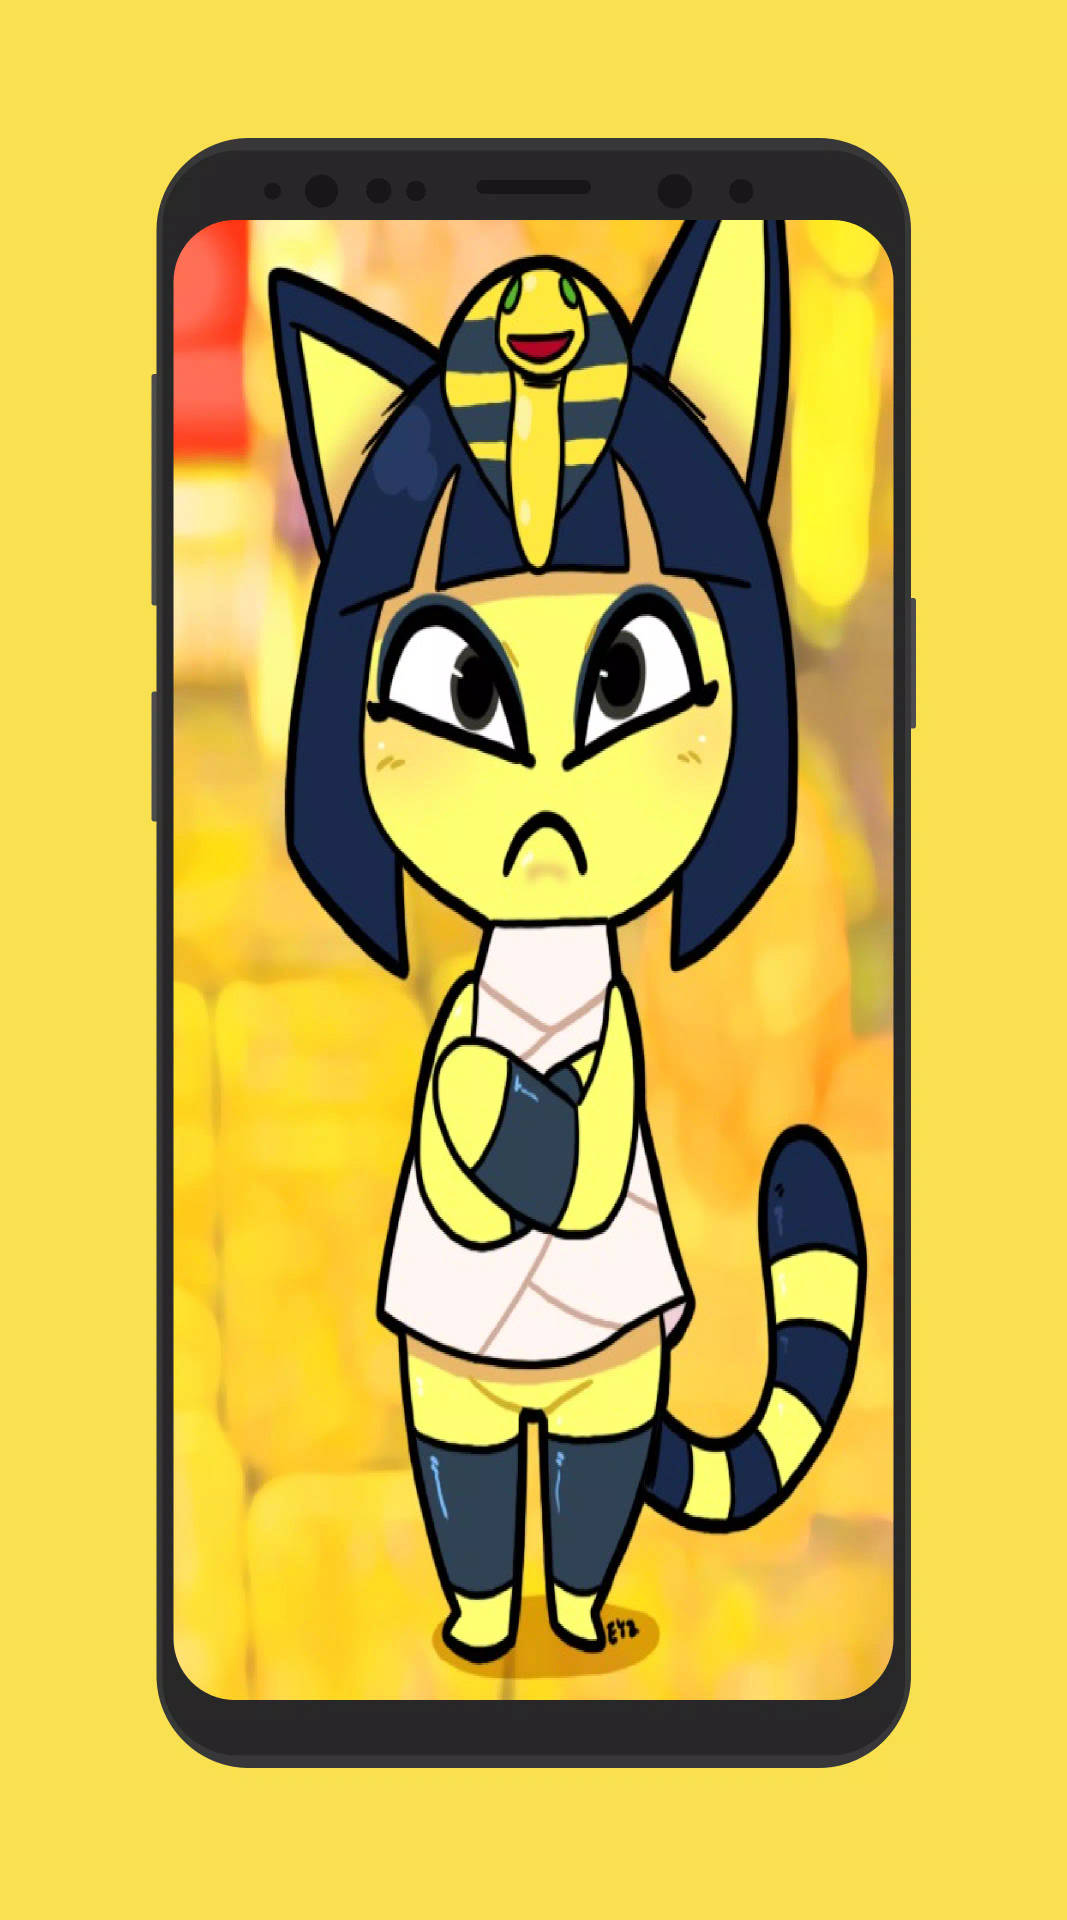 "Welcome to the world of Animal Crossing: New Horizons with Ankha!" Wallpaper